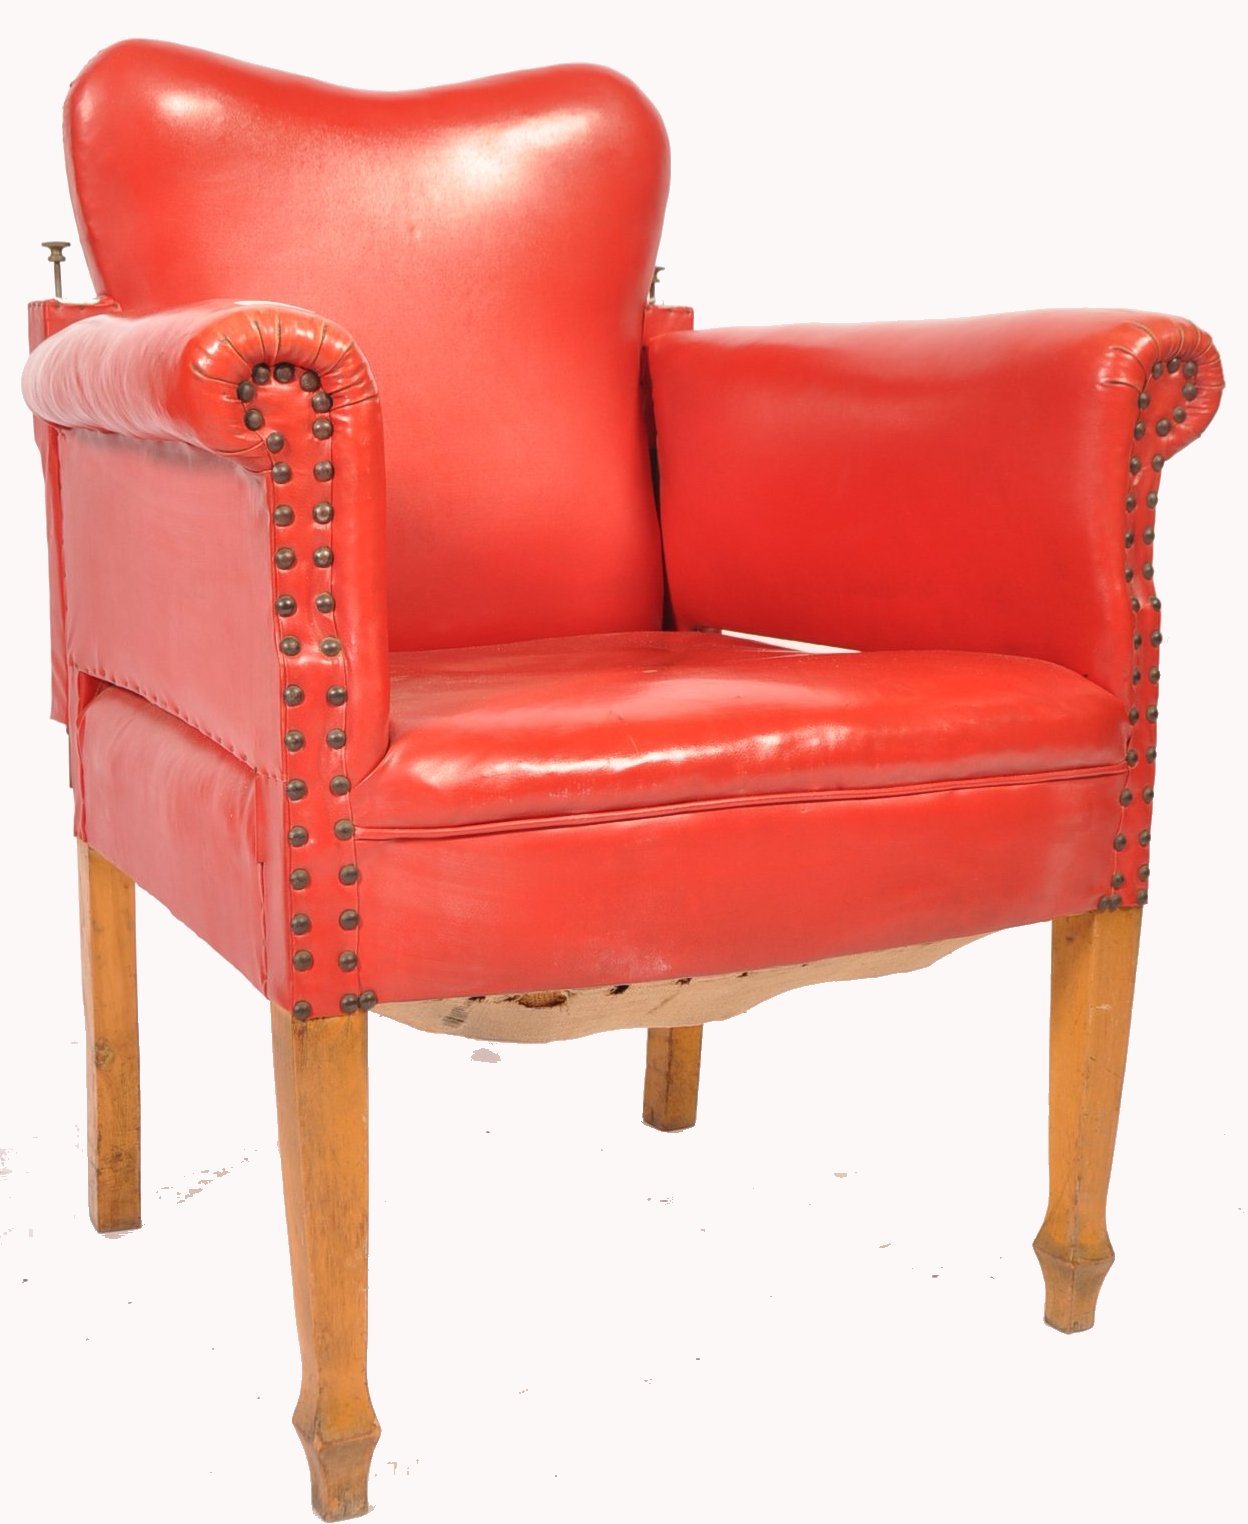 An early 20th century red leather barbers chair. The chair raised on beech wood tapering square legs